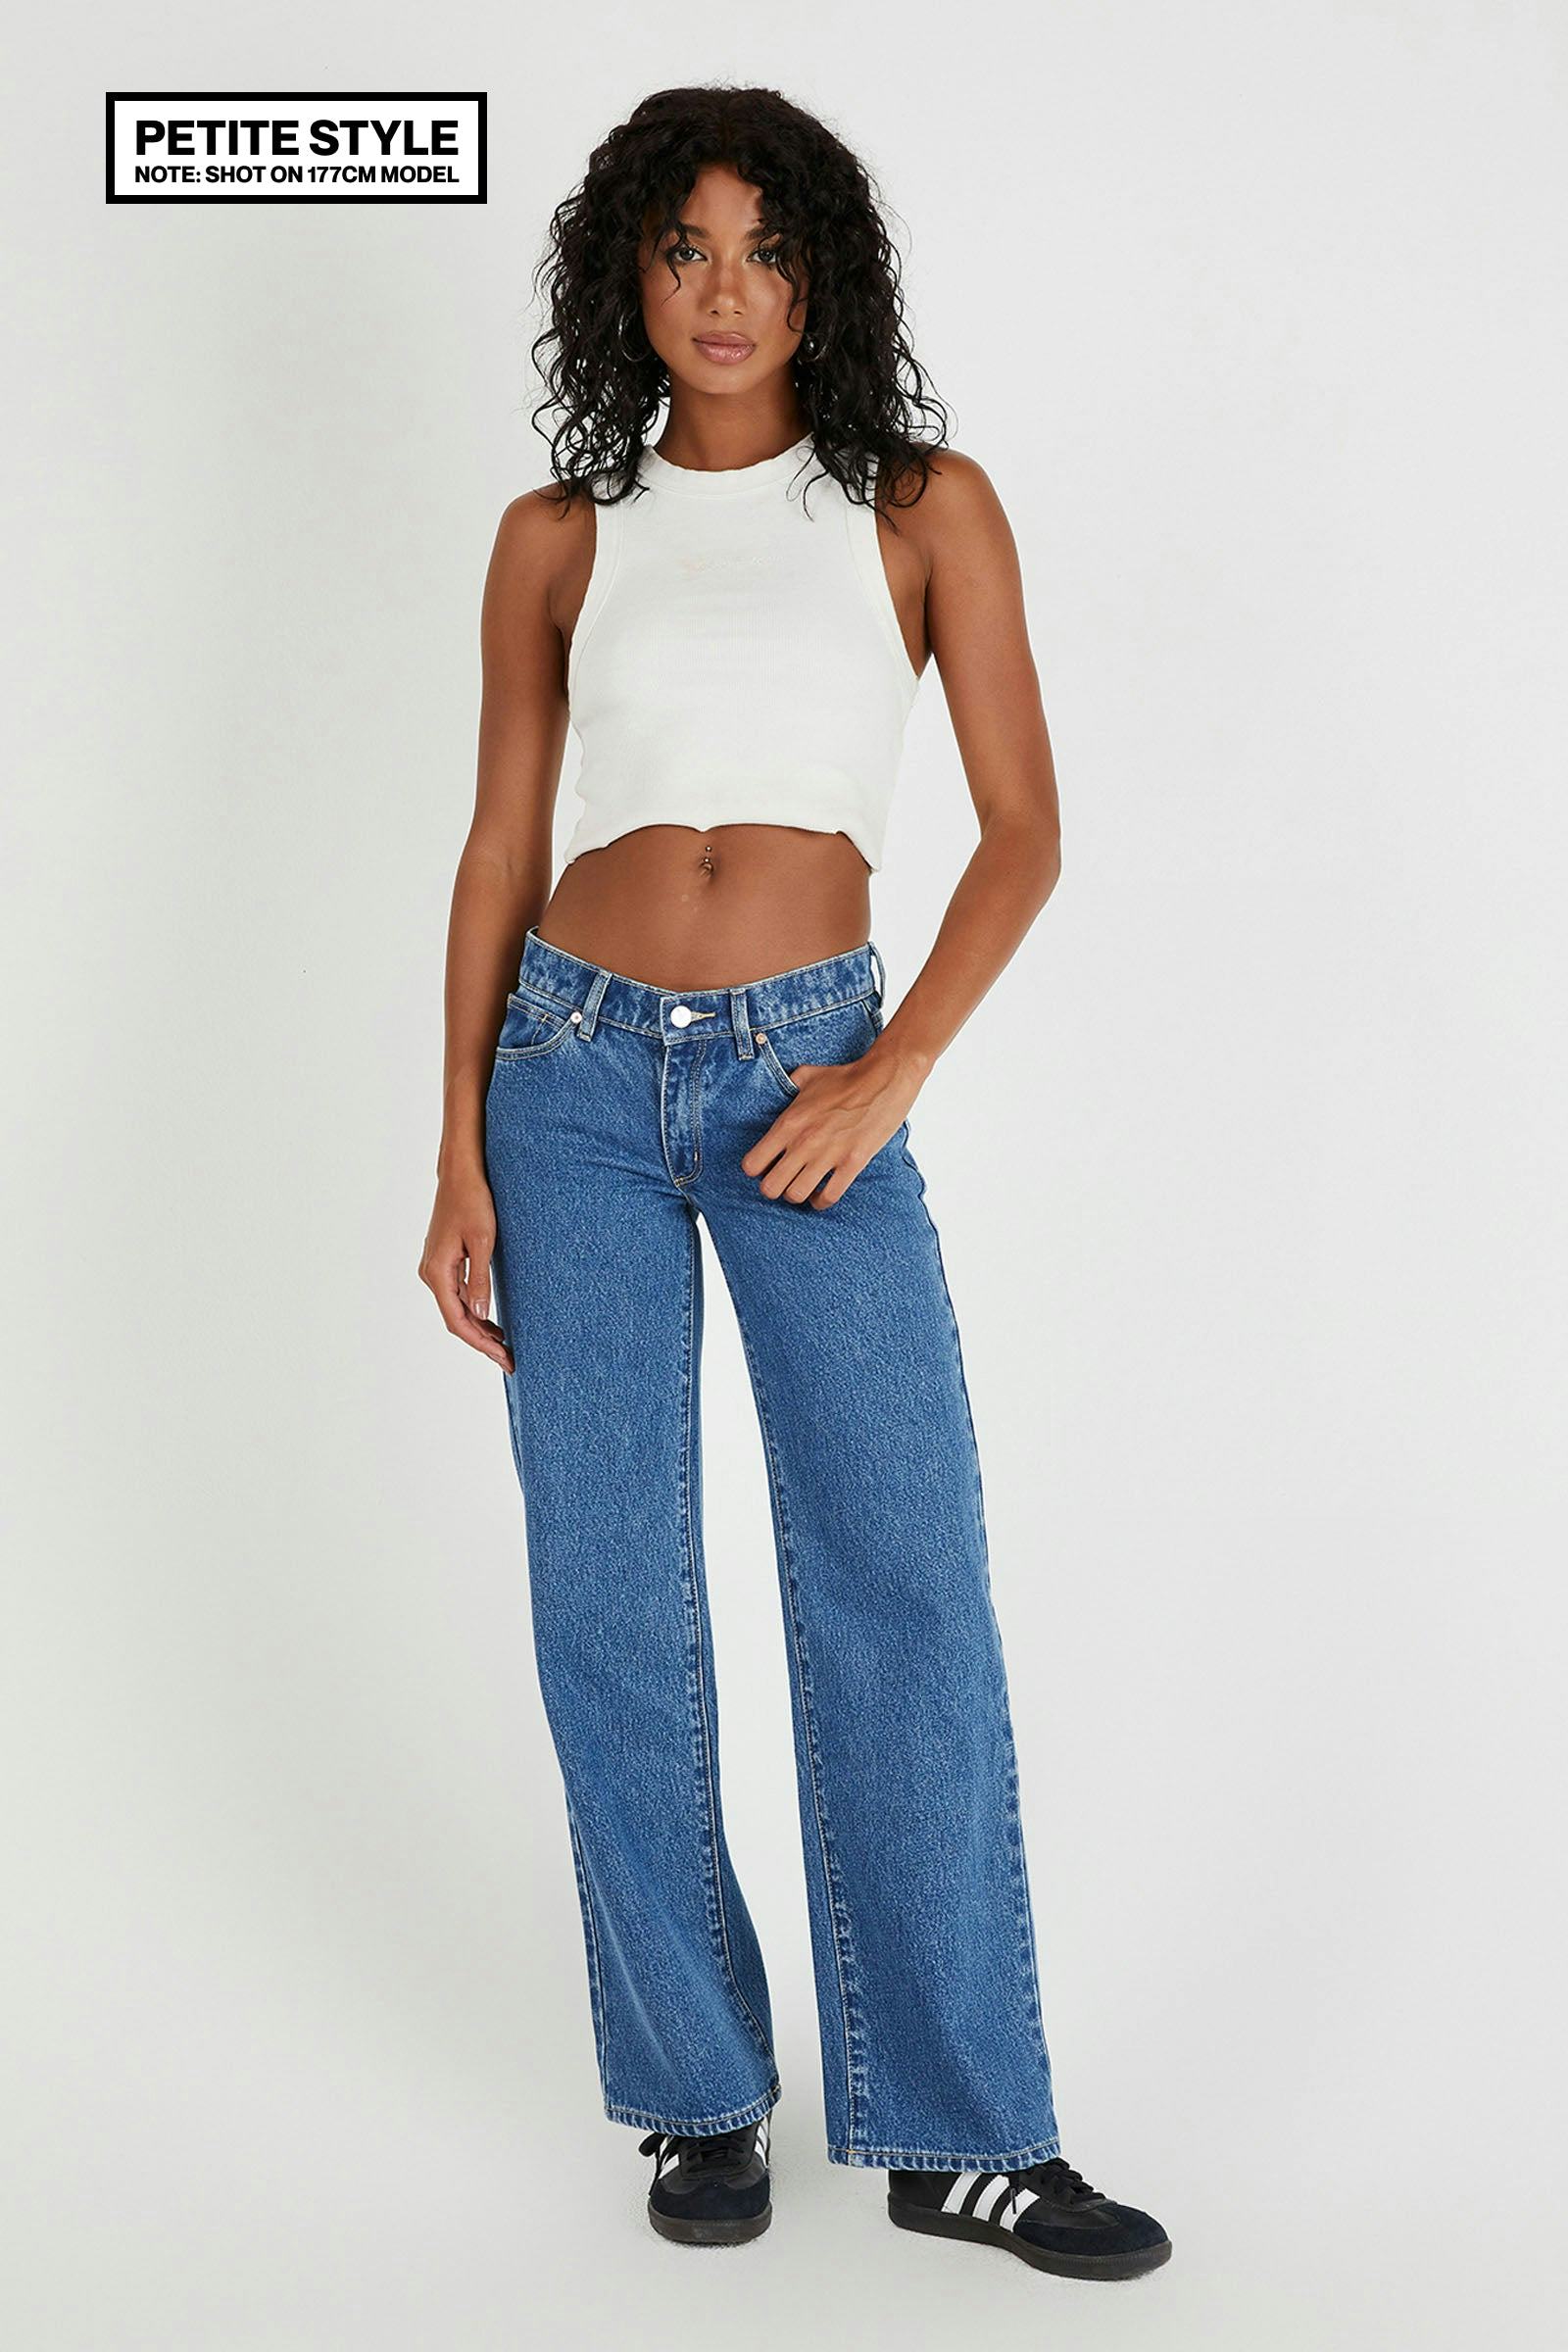 Women's Petite Jeans  Baggy, Straight, High-Waisted, Low-Rise